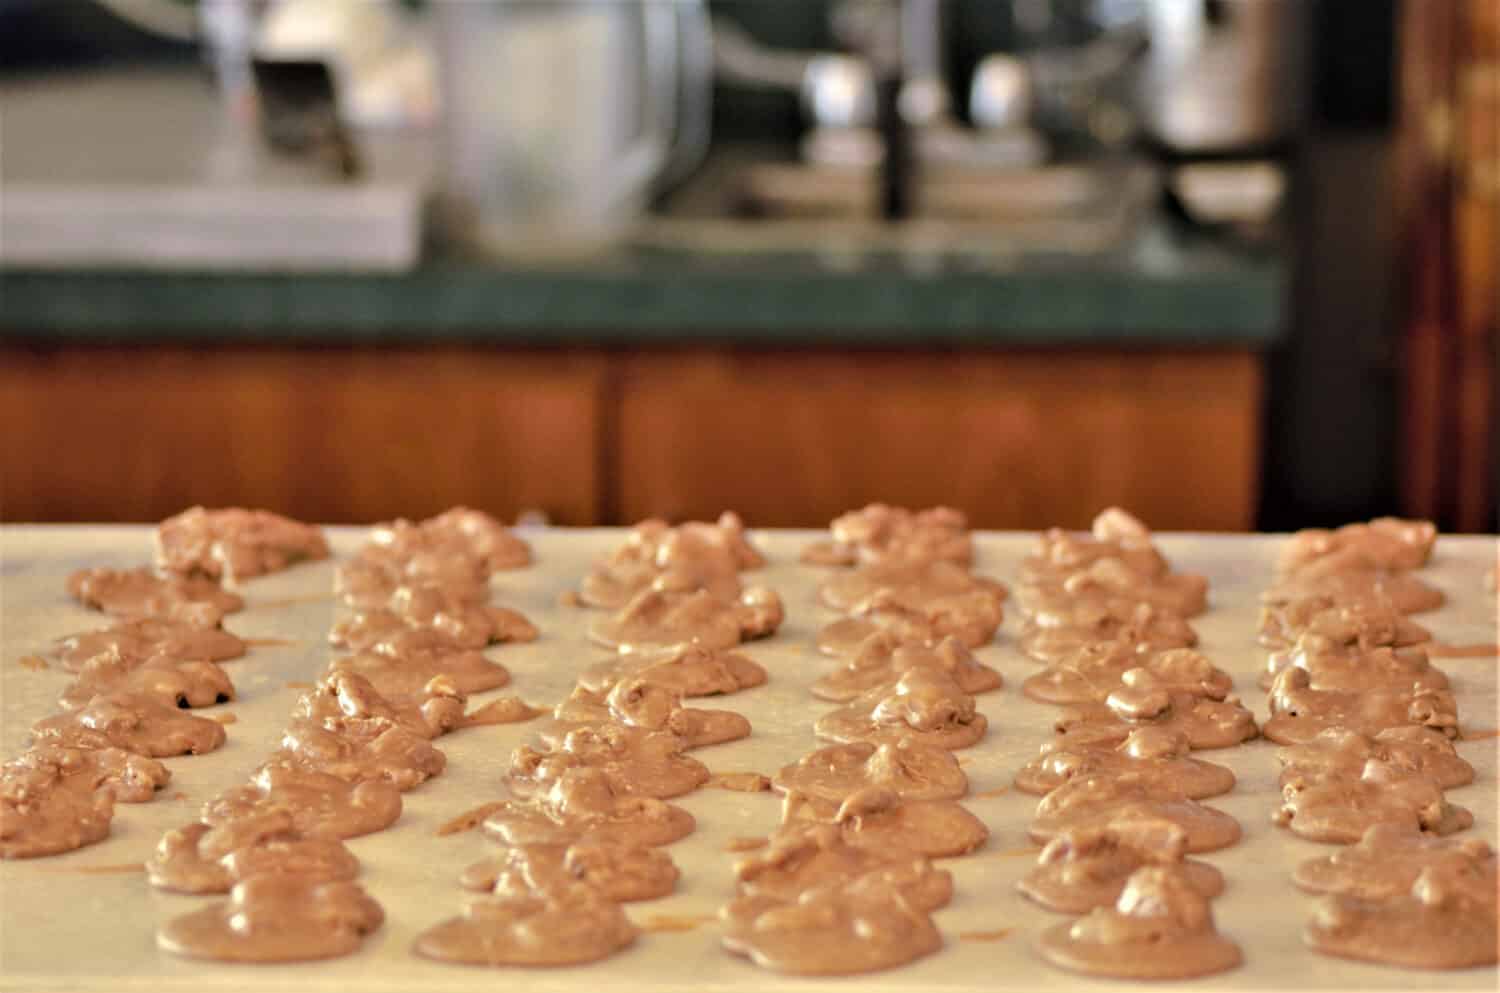 Pralines cooling at a candy store in New Orleans